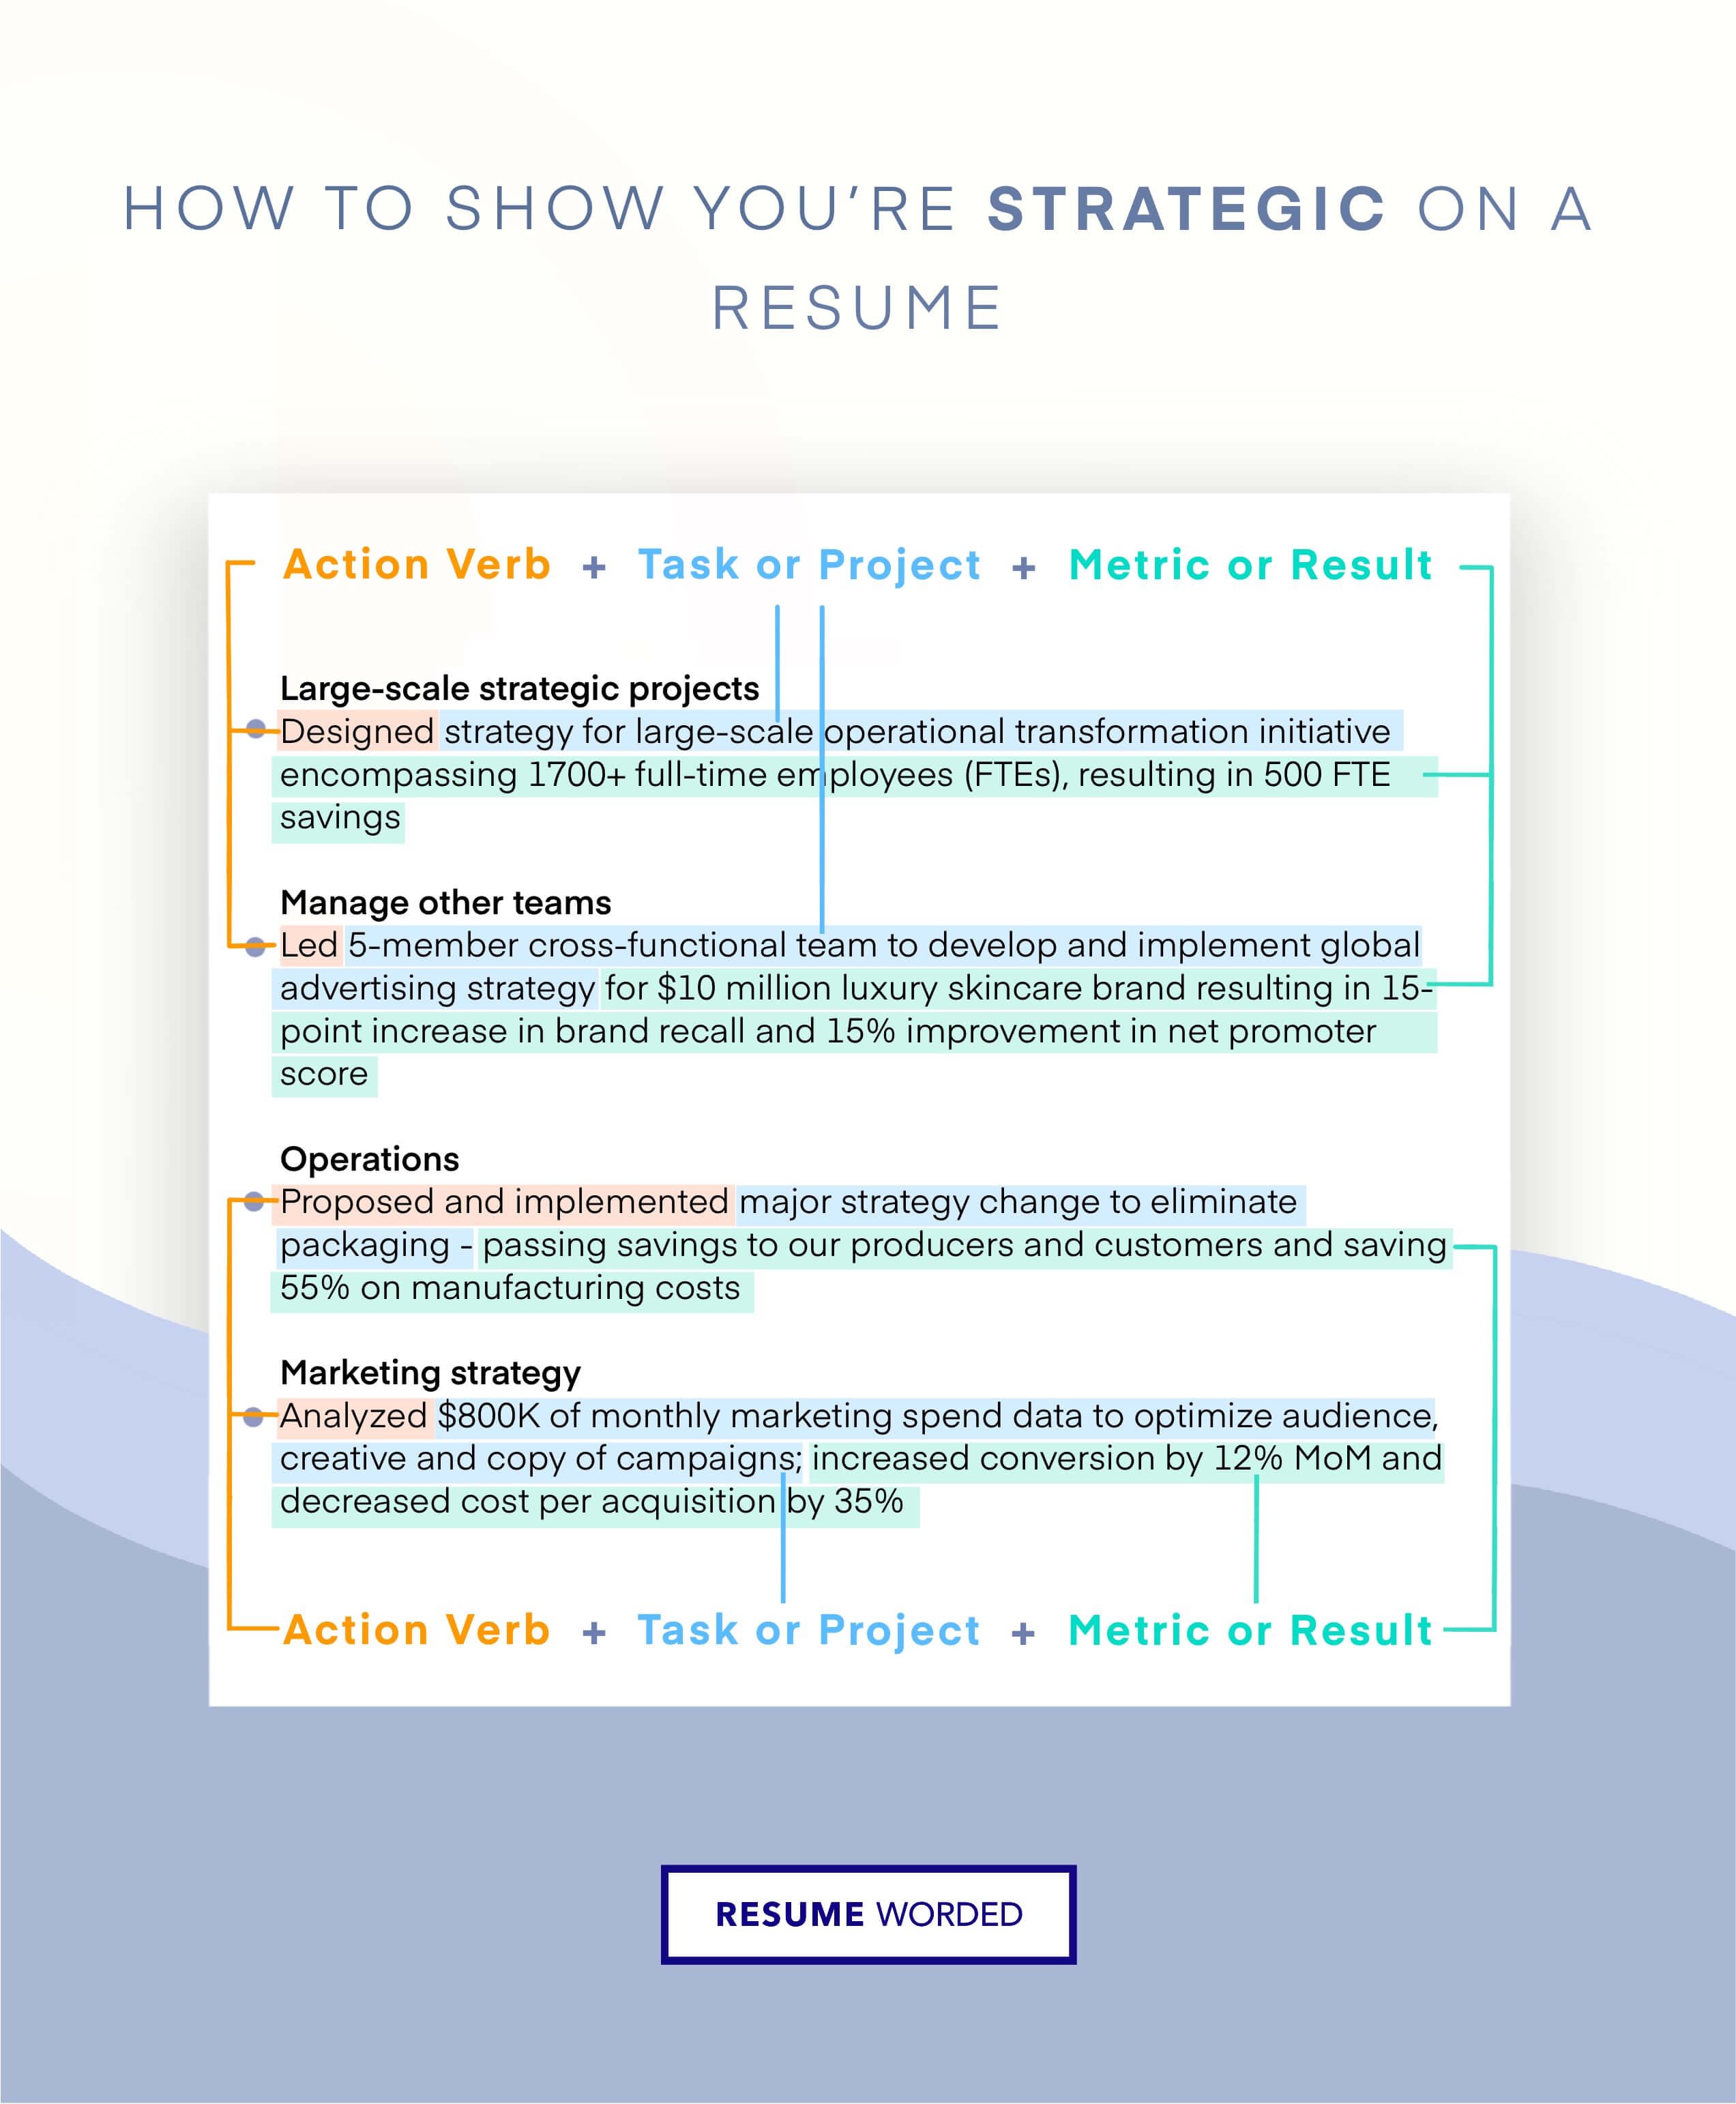 Write a clear ‘Strategic Account Manager’ title. - Strategic Account Manager Resume